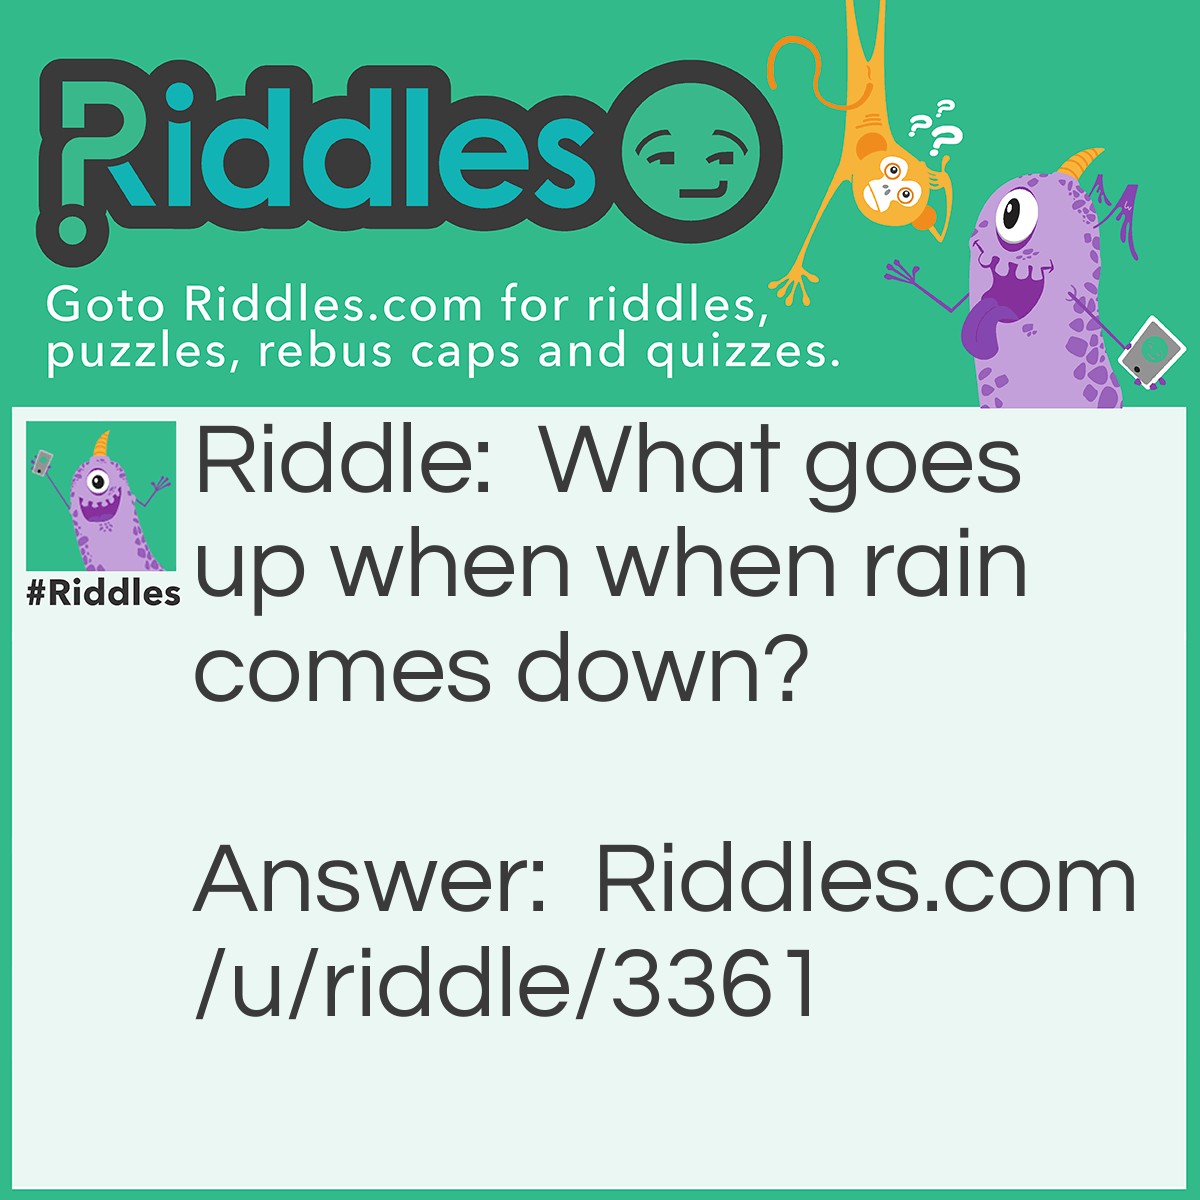 Riddle: What goes up when when rain comes down? Answer: An umbrella.